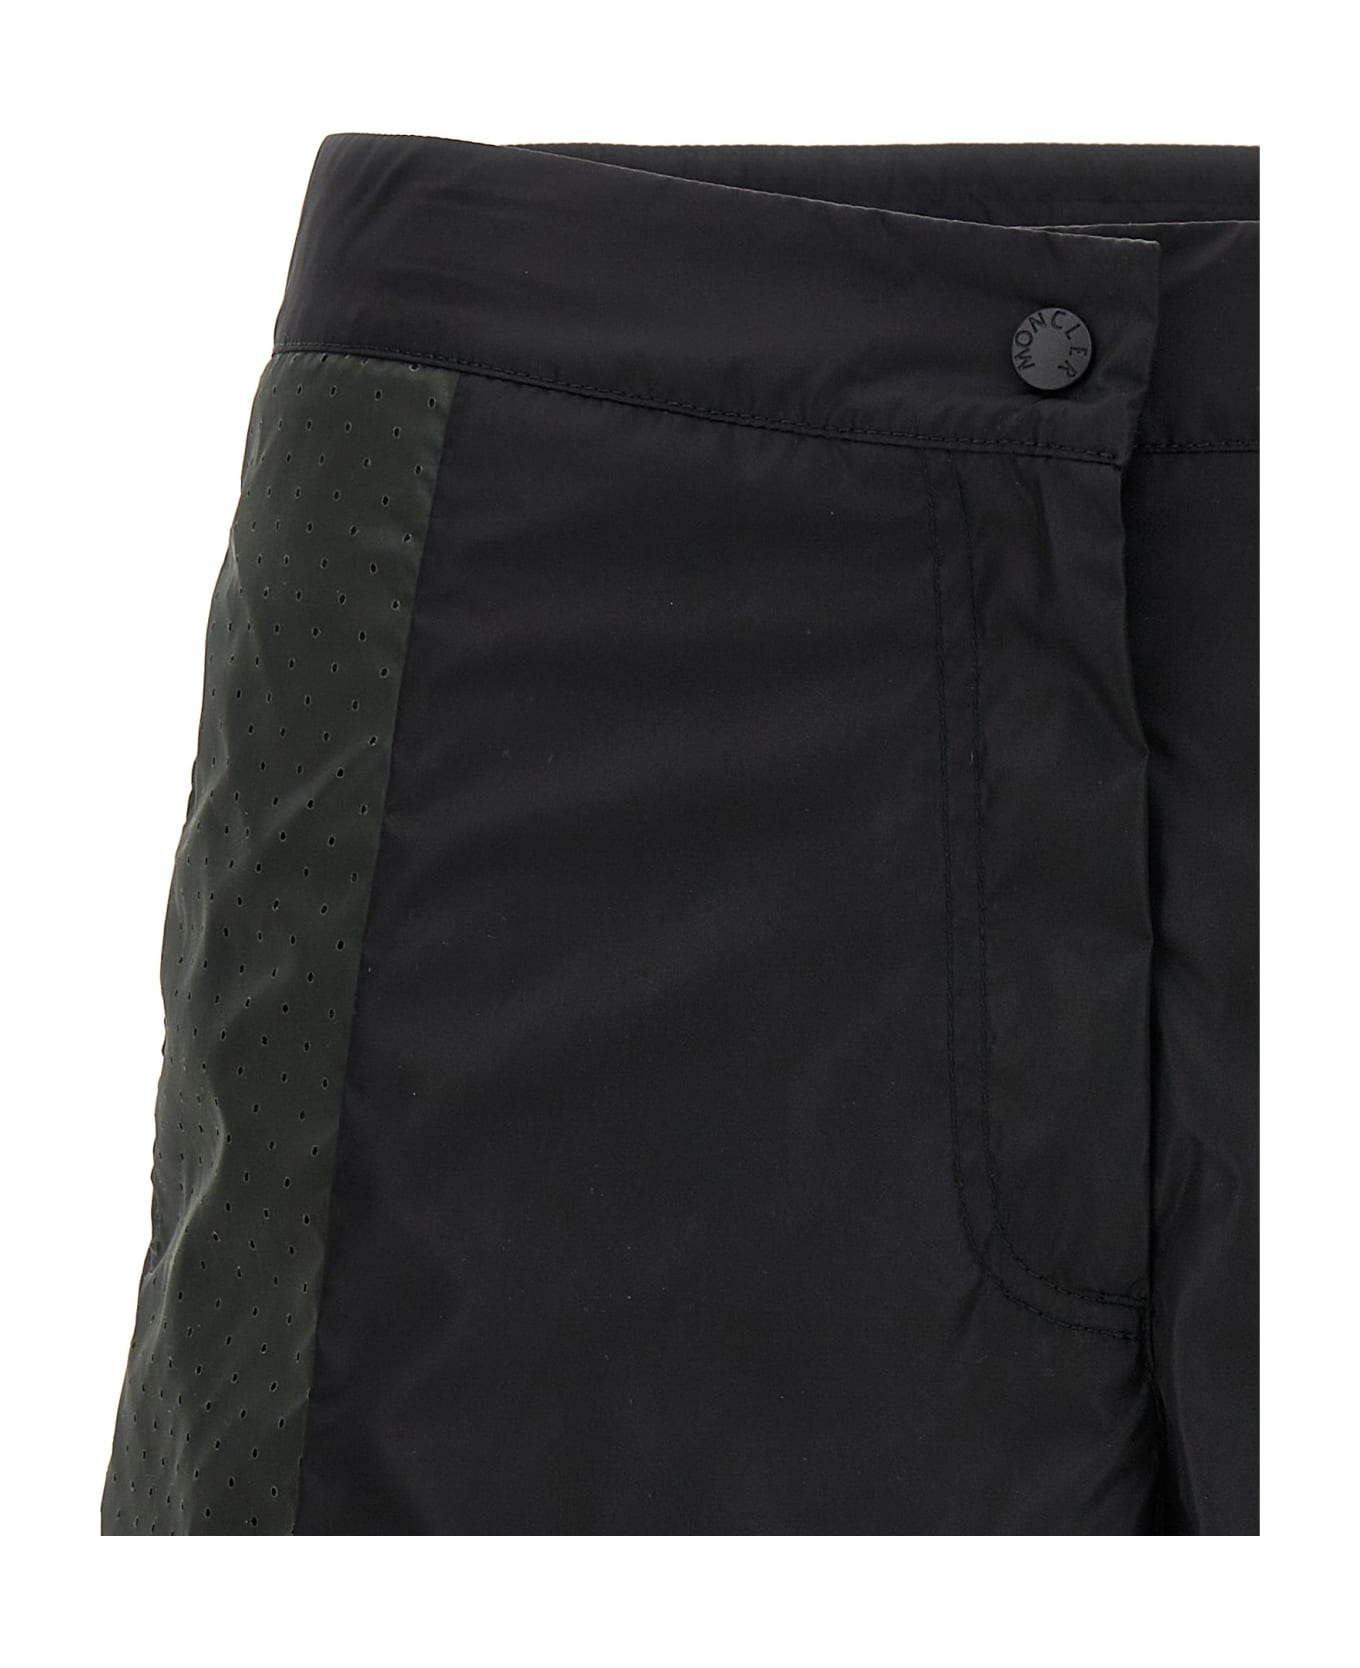 Moncler Born To Protect Capsule Shorts - Black  